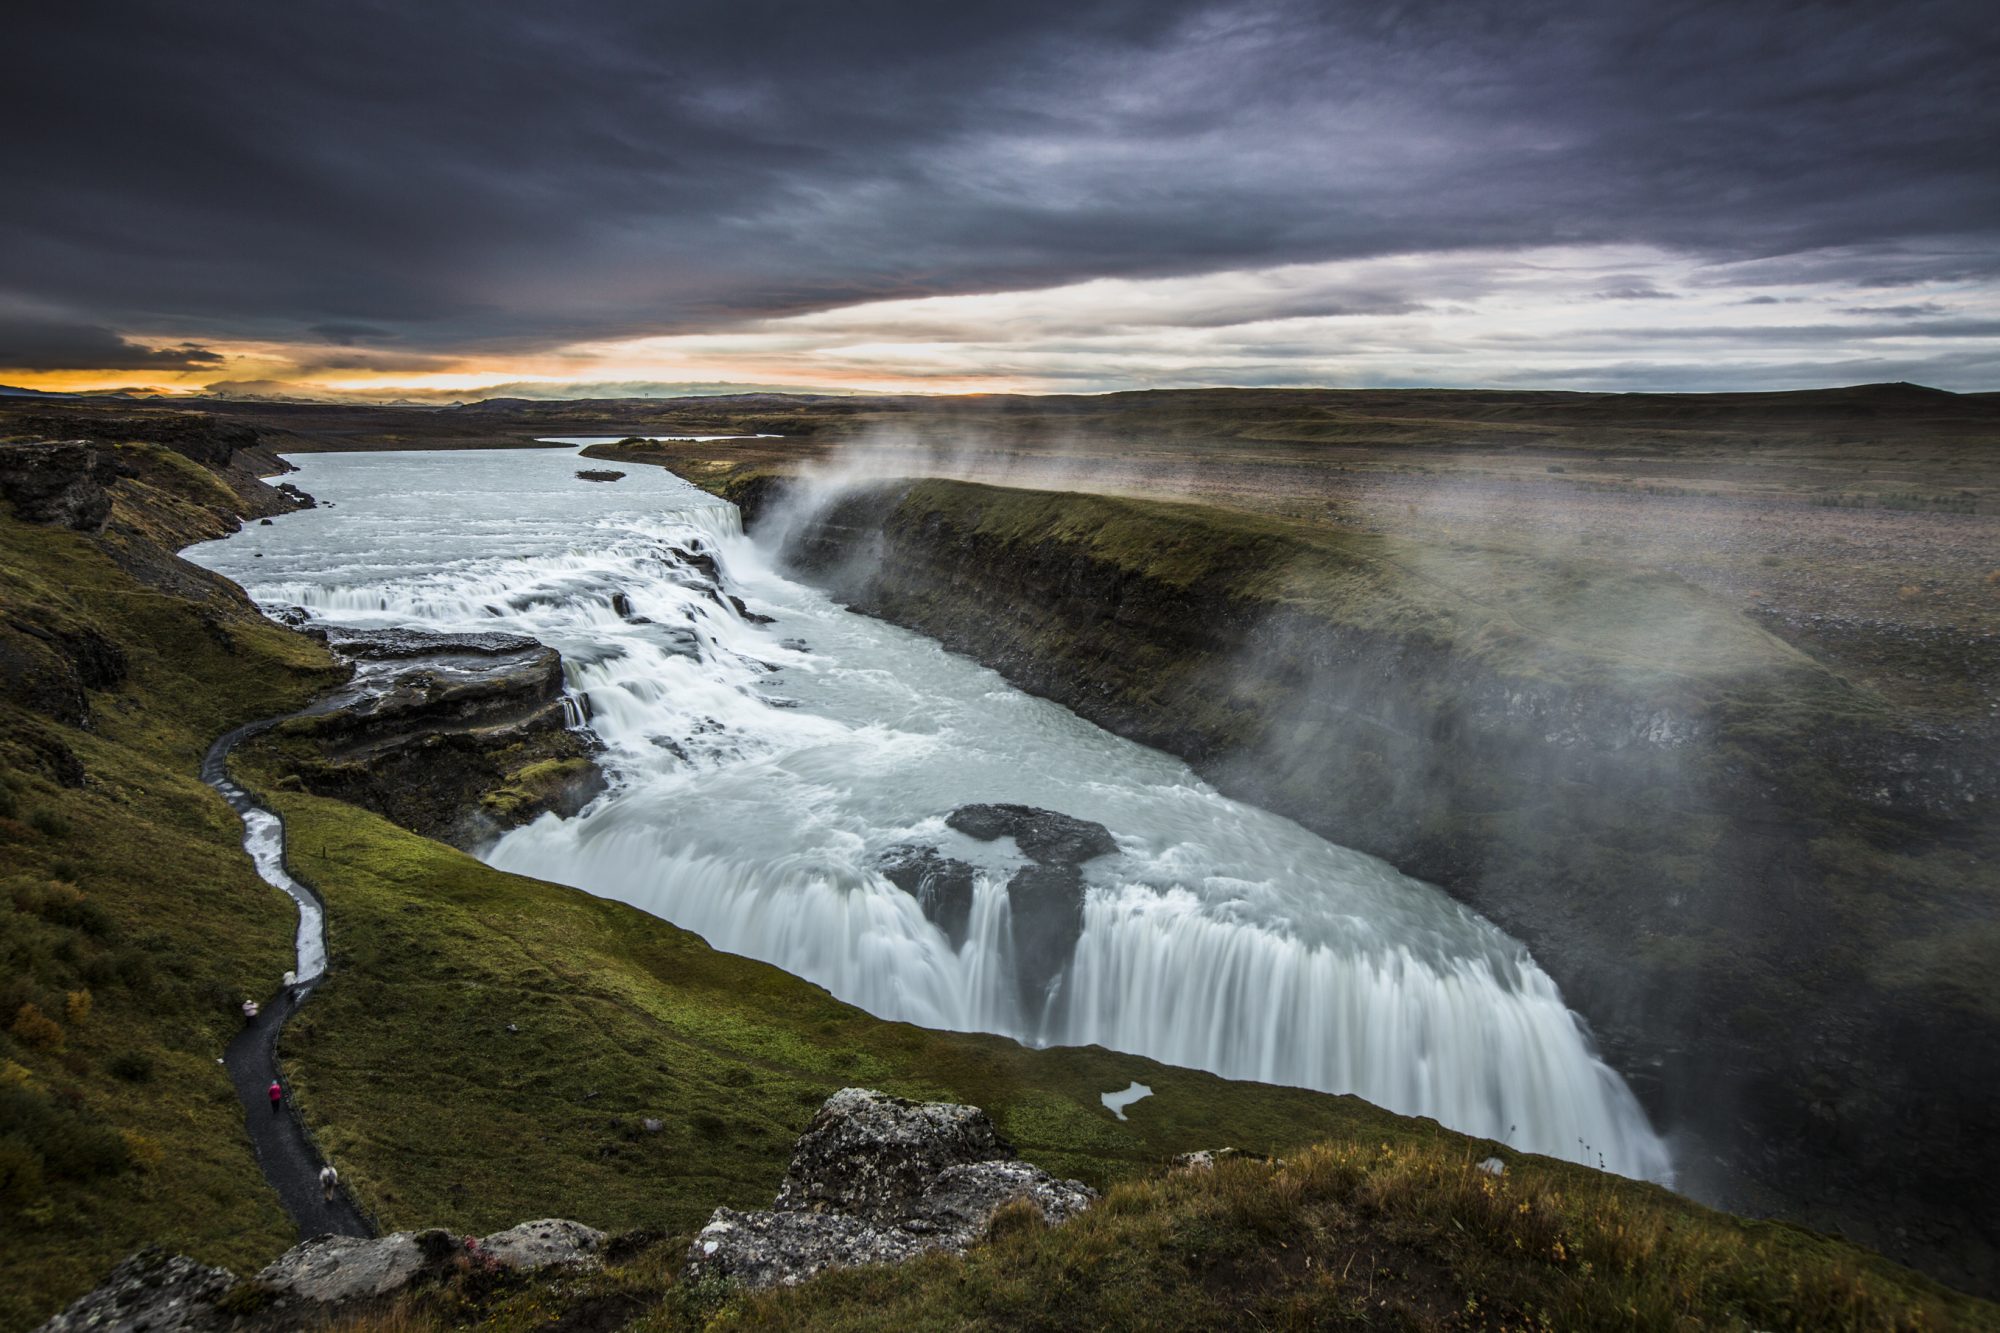 Golden Circle - Gullfoss waterfall is the most popular waterfall in Iceland